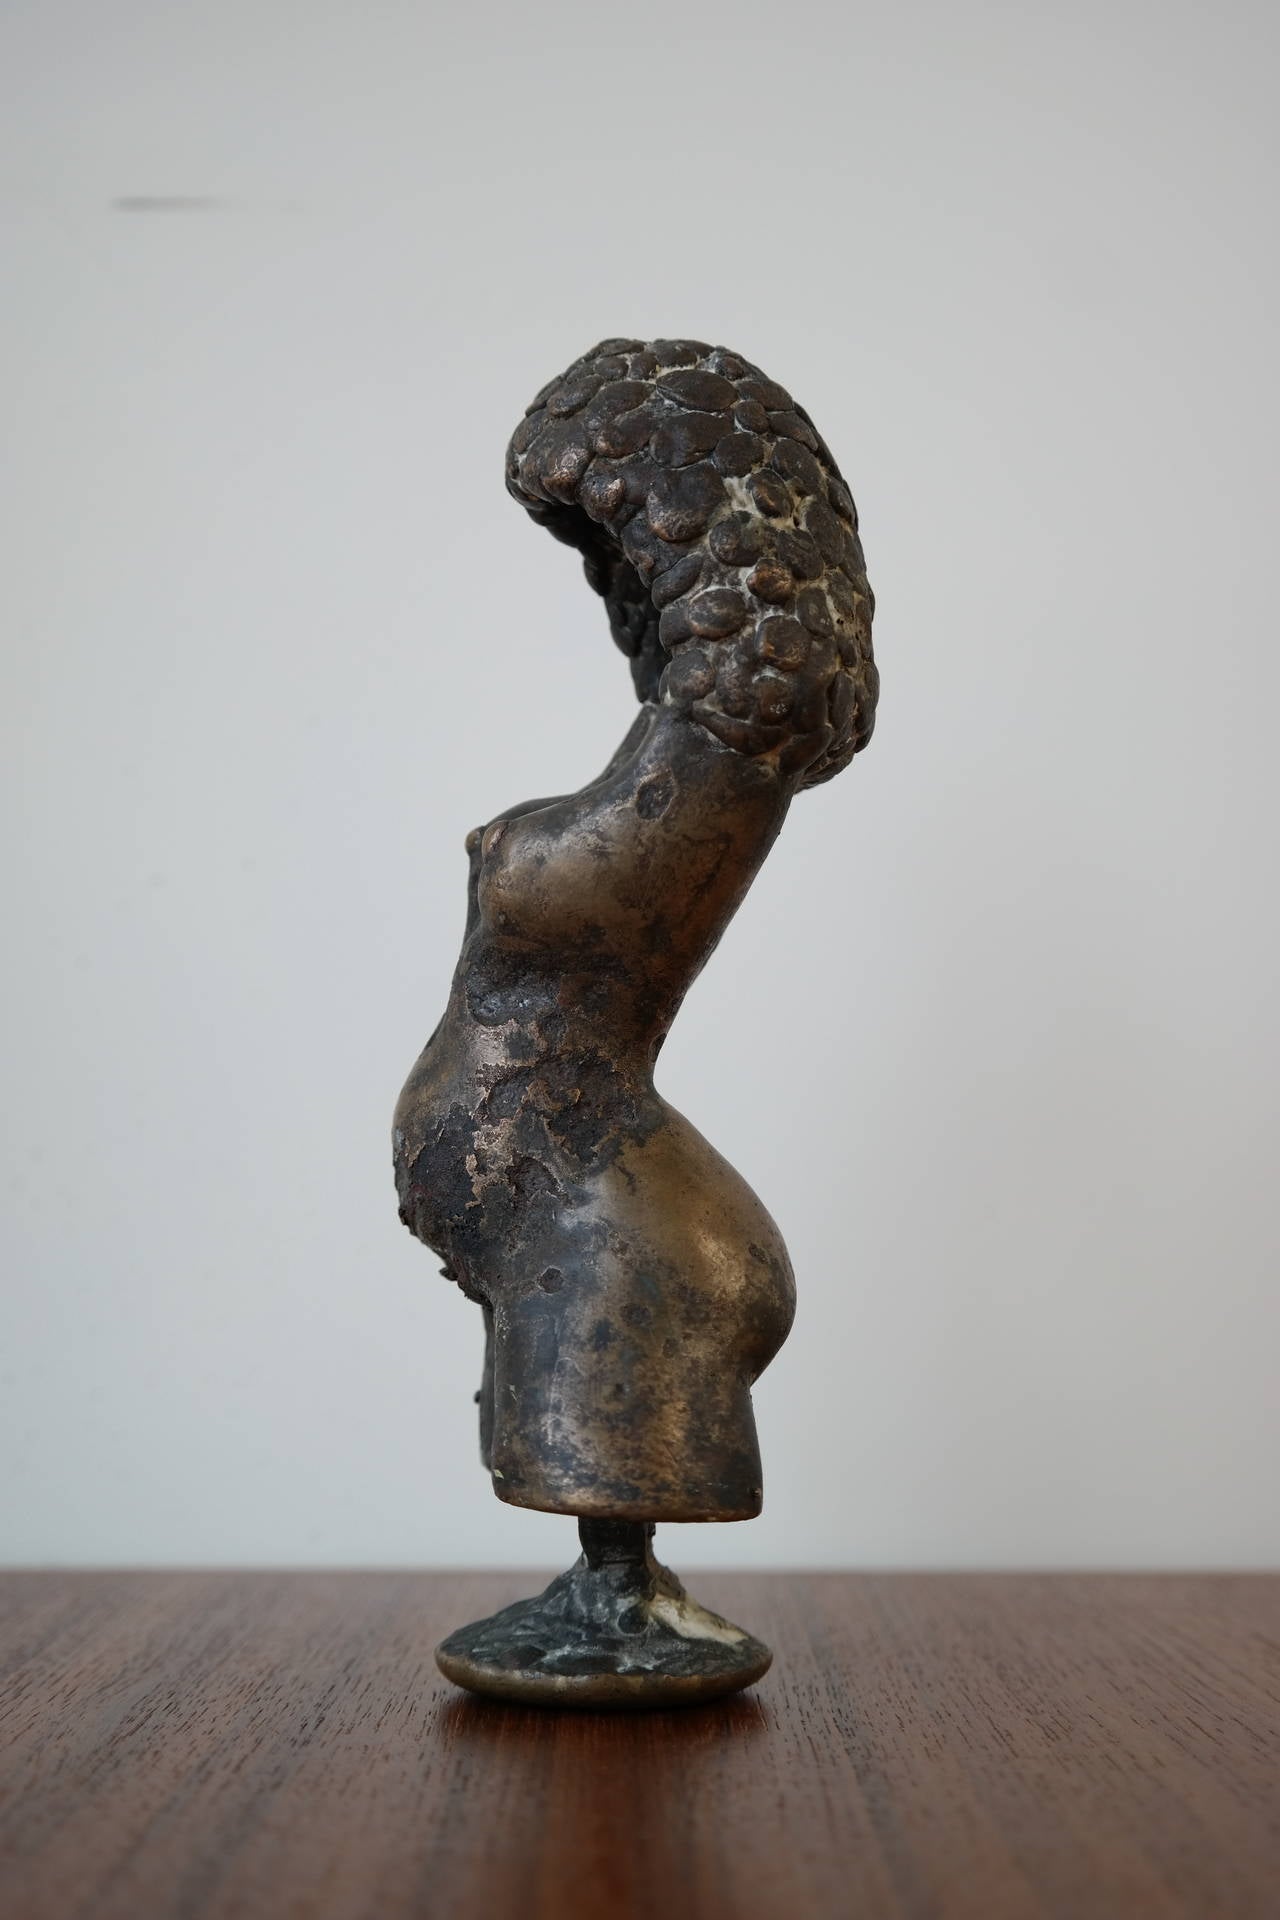 Very impressive small-scale bronze sculpture of a female form. Wonderful details. Signed on underside but unable to find information on artist. Heavy and well made. Brutalist form with great patina.